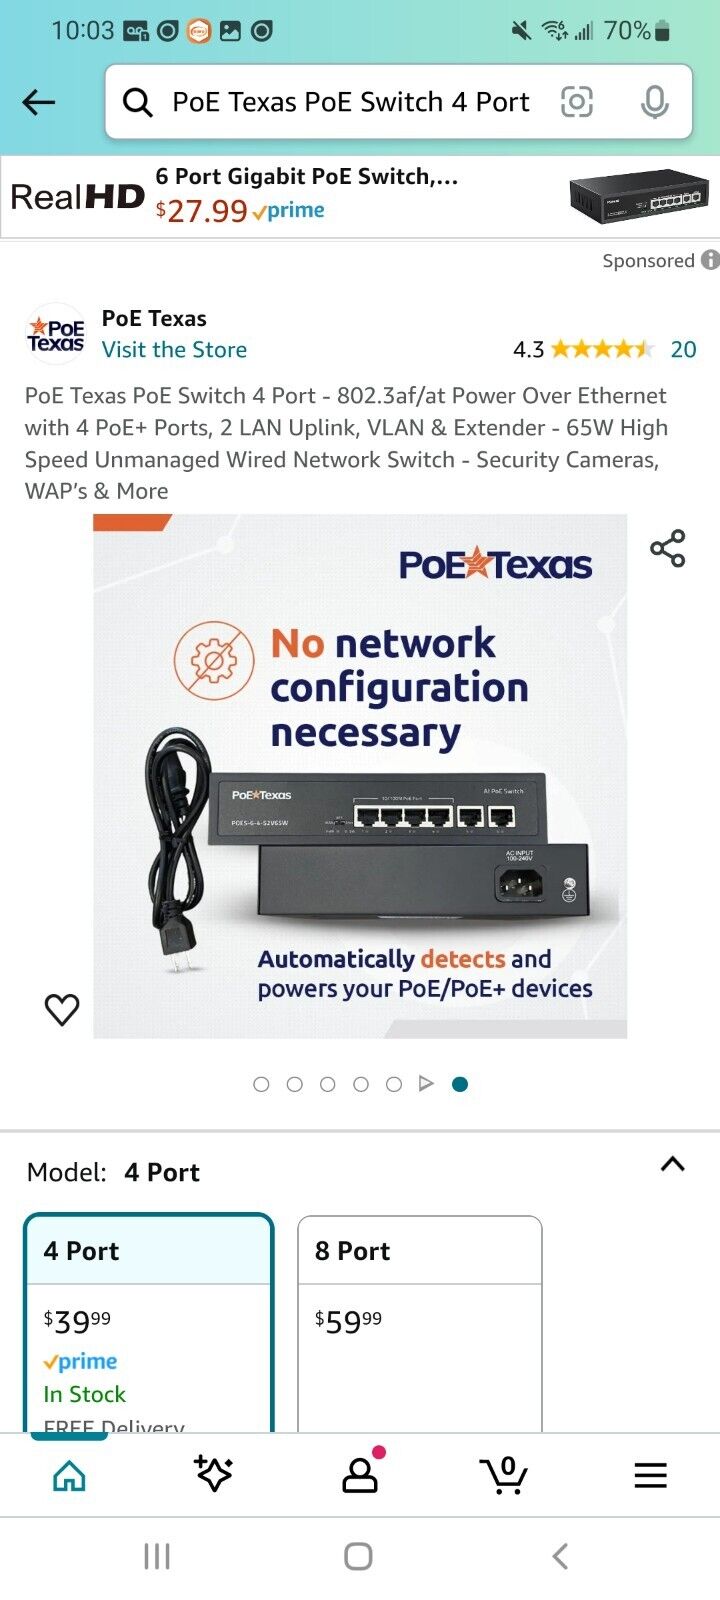 PoE Texas PoE Switch 4 Port - 802.3af/at Power Over Ethernet with 4 PoE+ Ports,